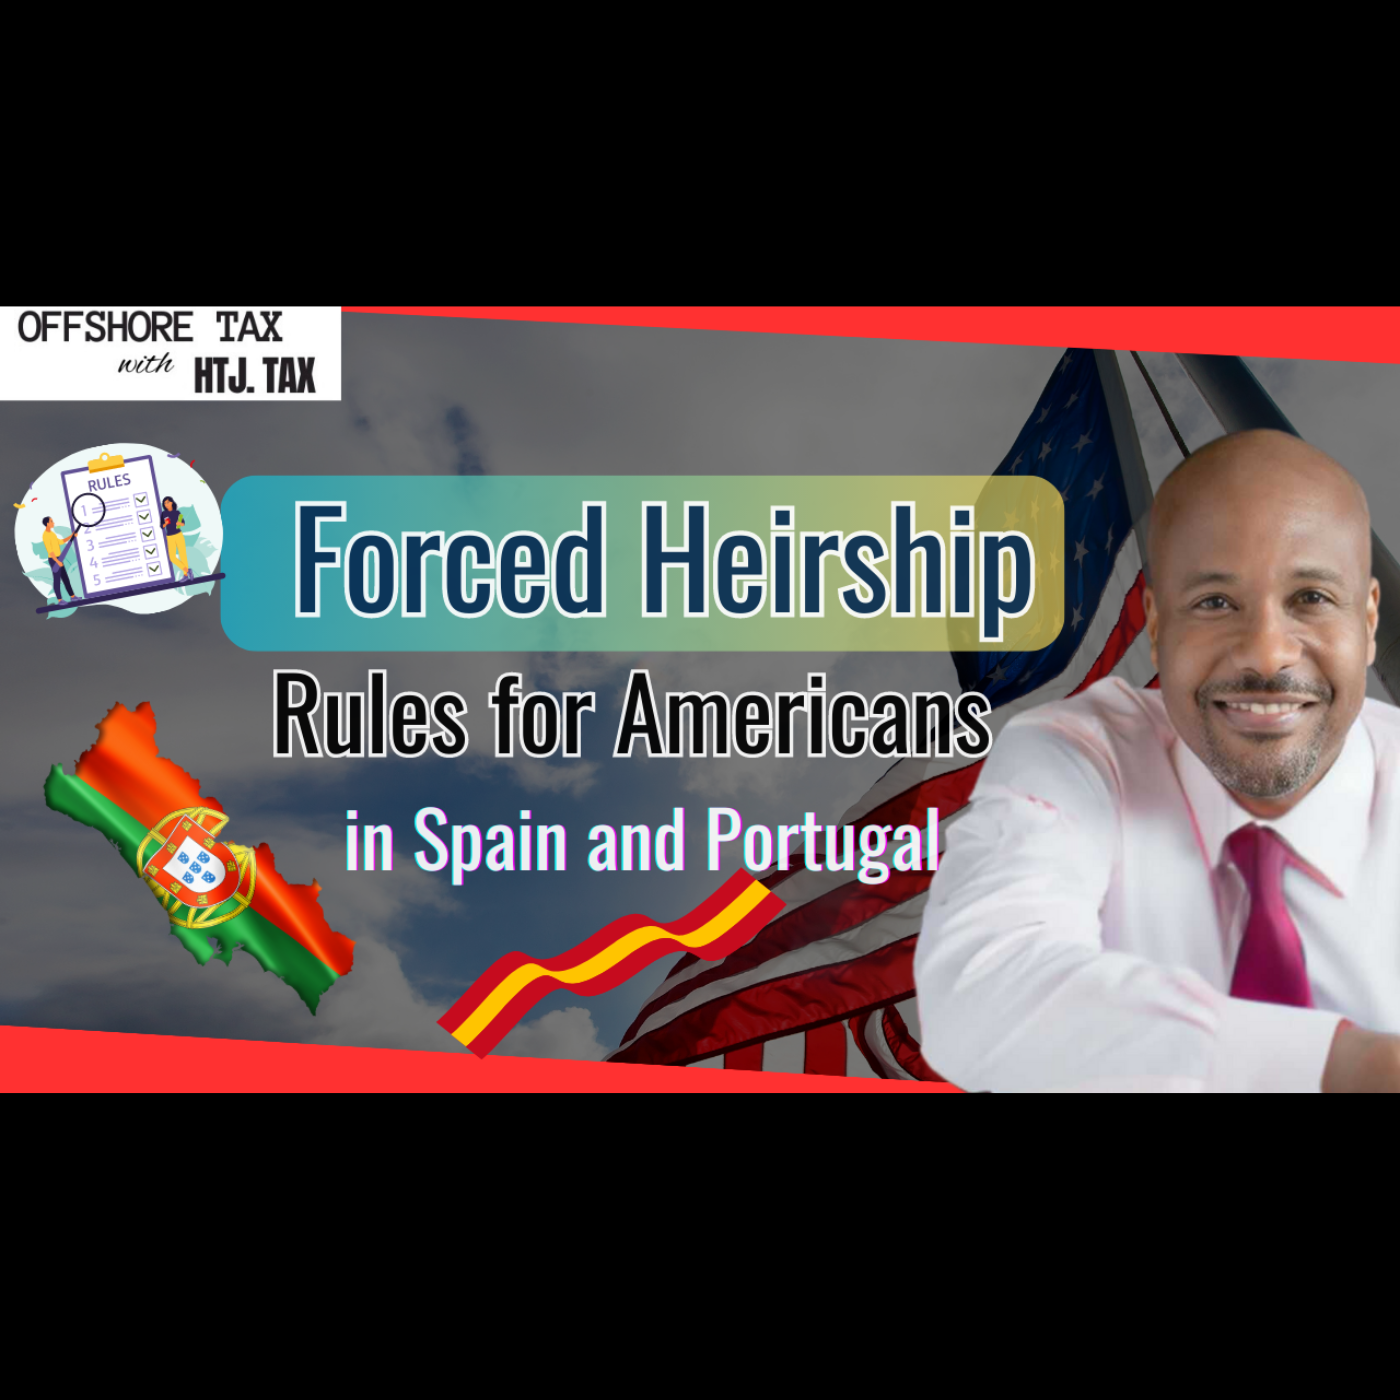 [ Offshore Tax ] Forced Heirship Rules For Americans In Spain And Portugal.